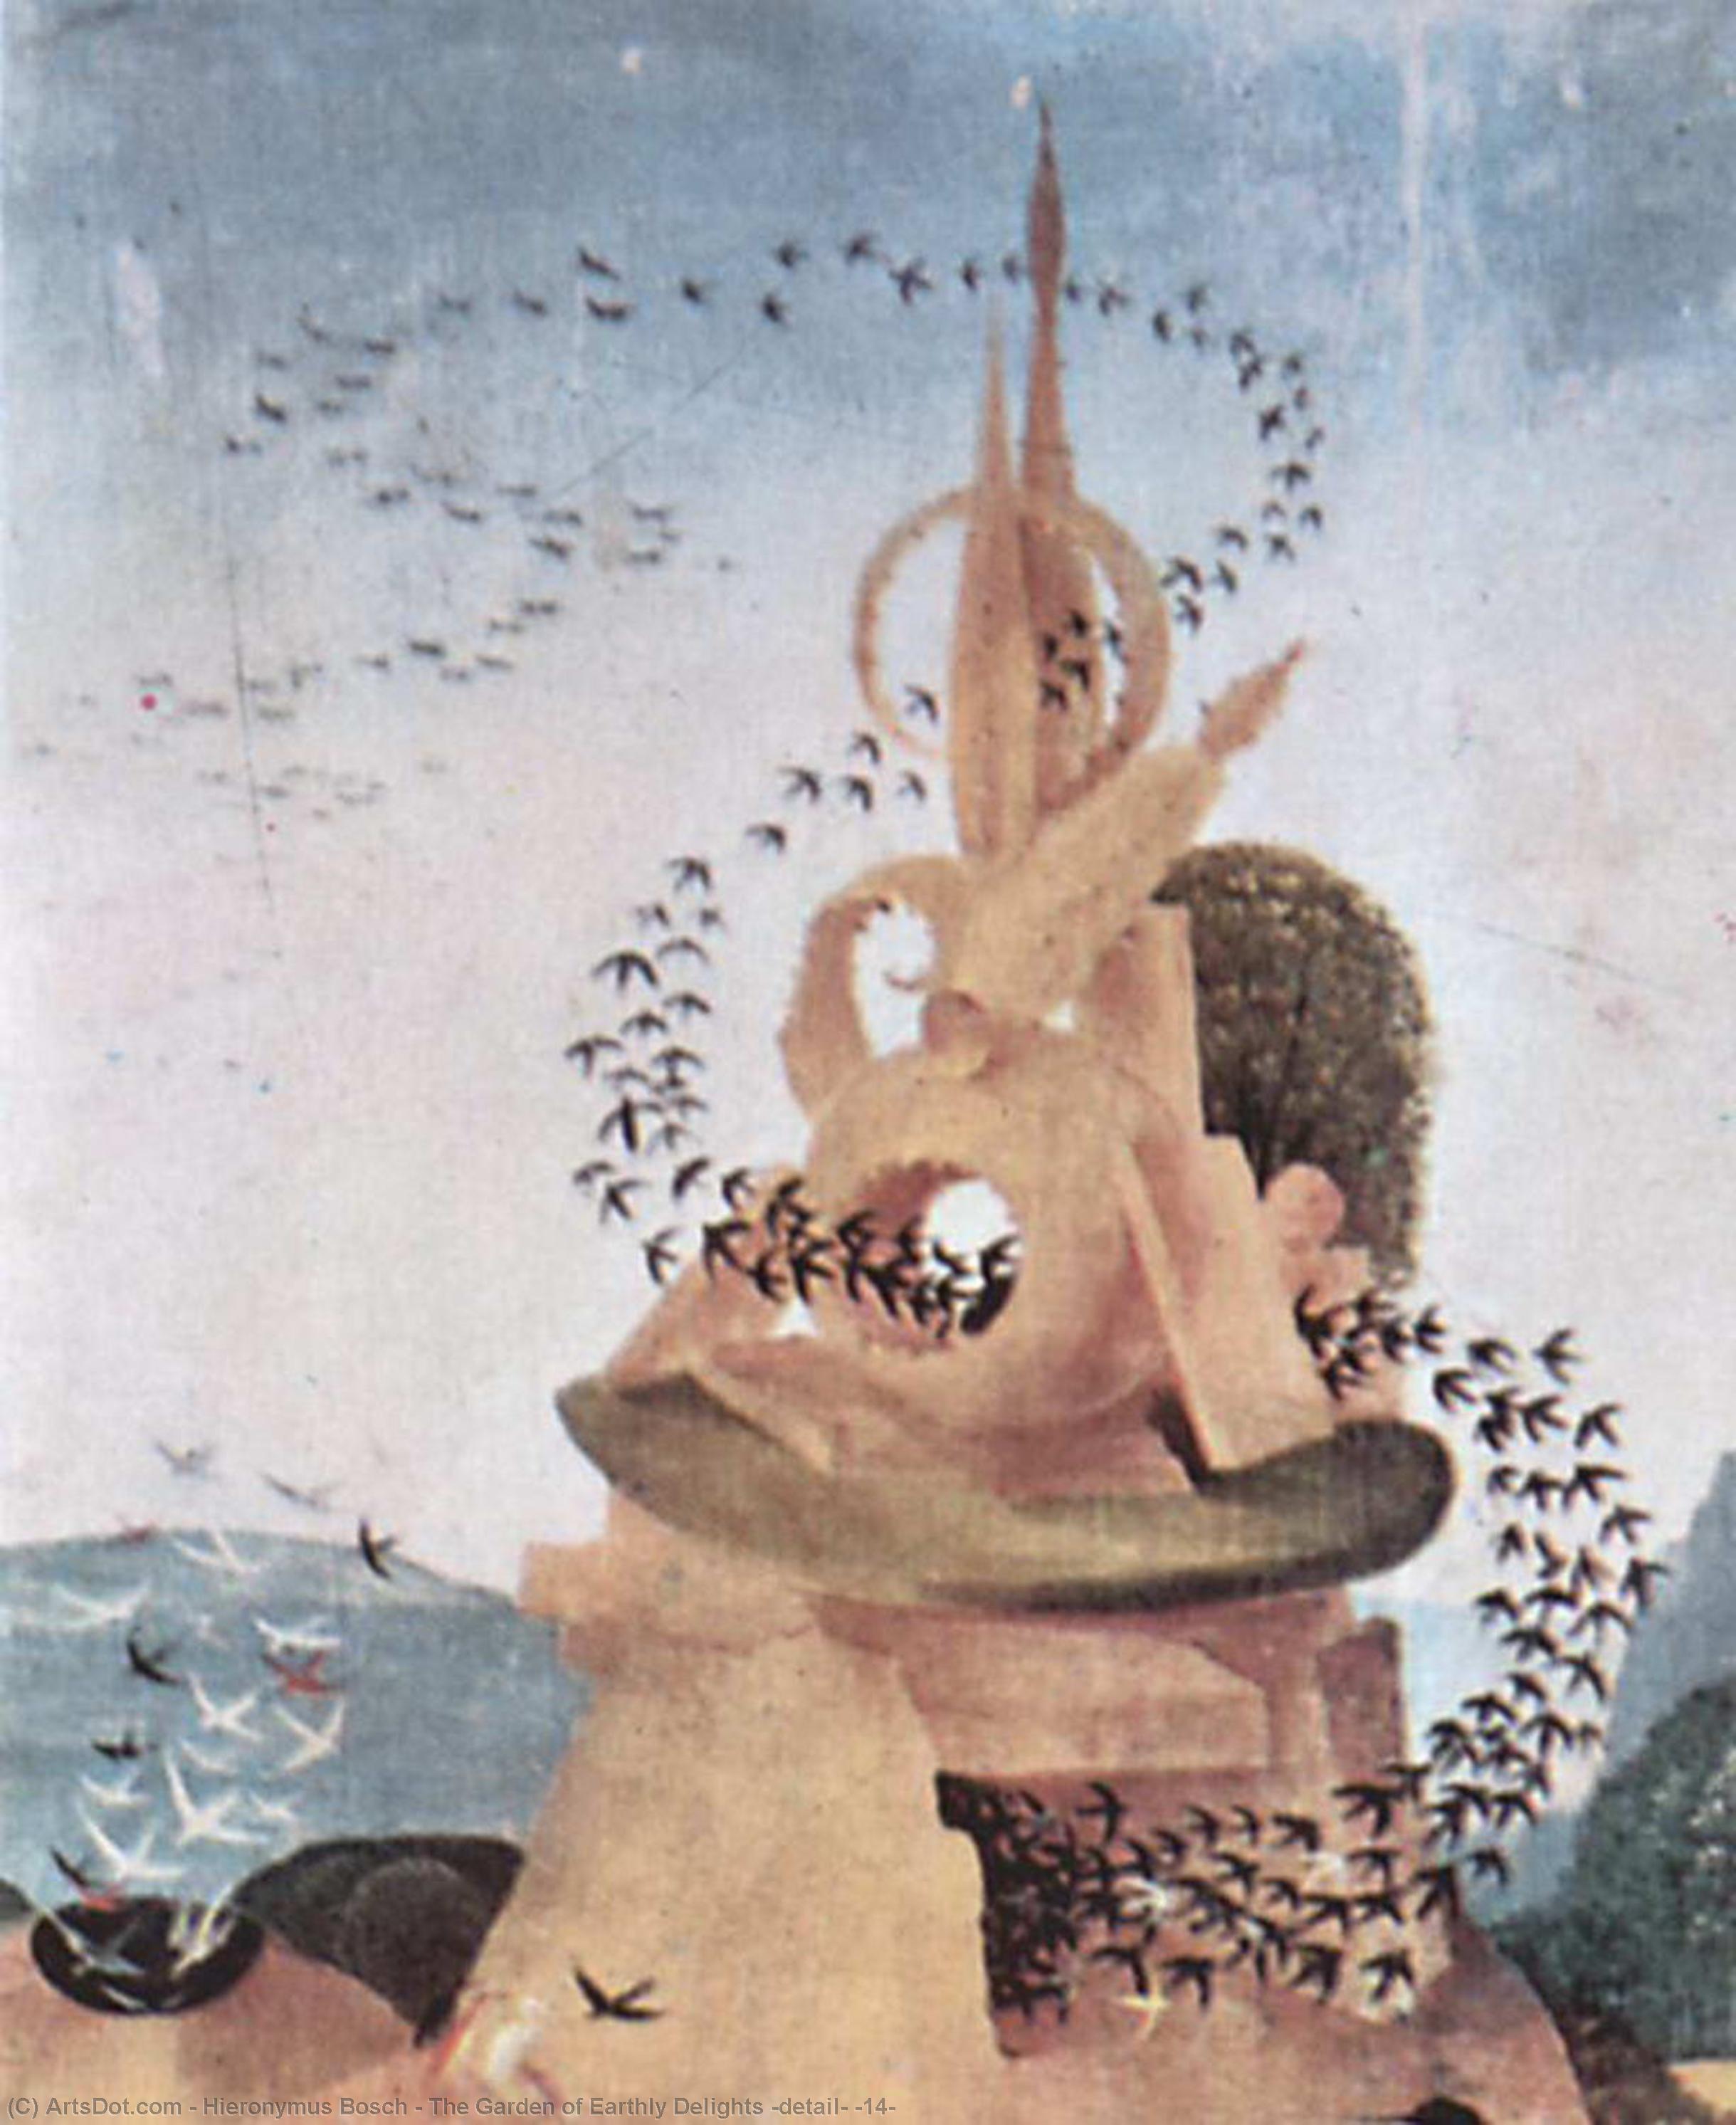 WikiOO.org - 百科事典 - 絵画、アートワーク Hieronymus Bosch - 庭 of Earthly 楽しみ ( 細部 ) ( 14 )